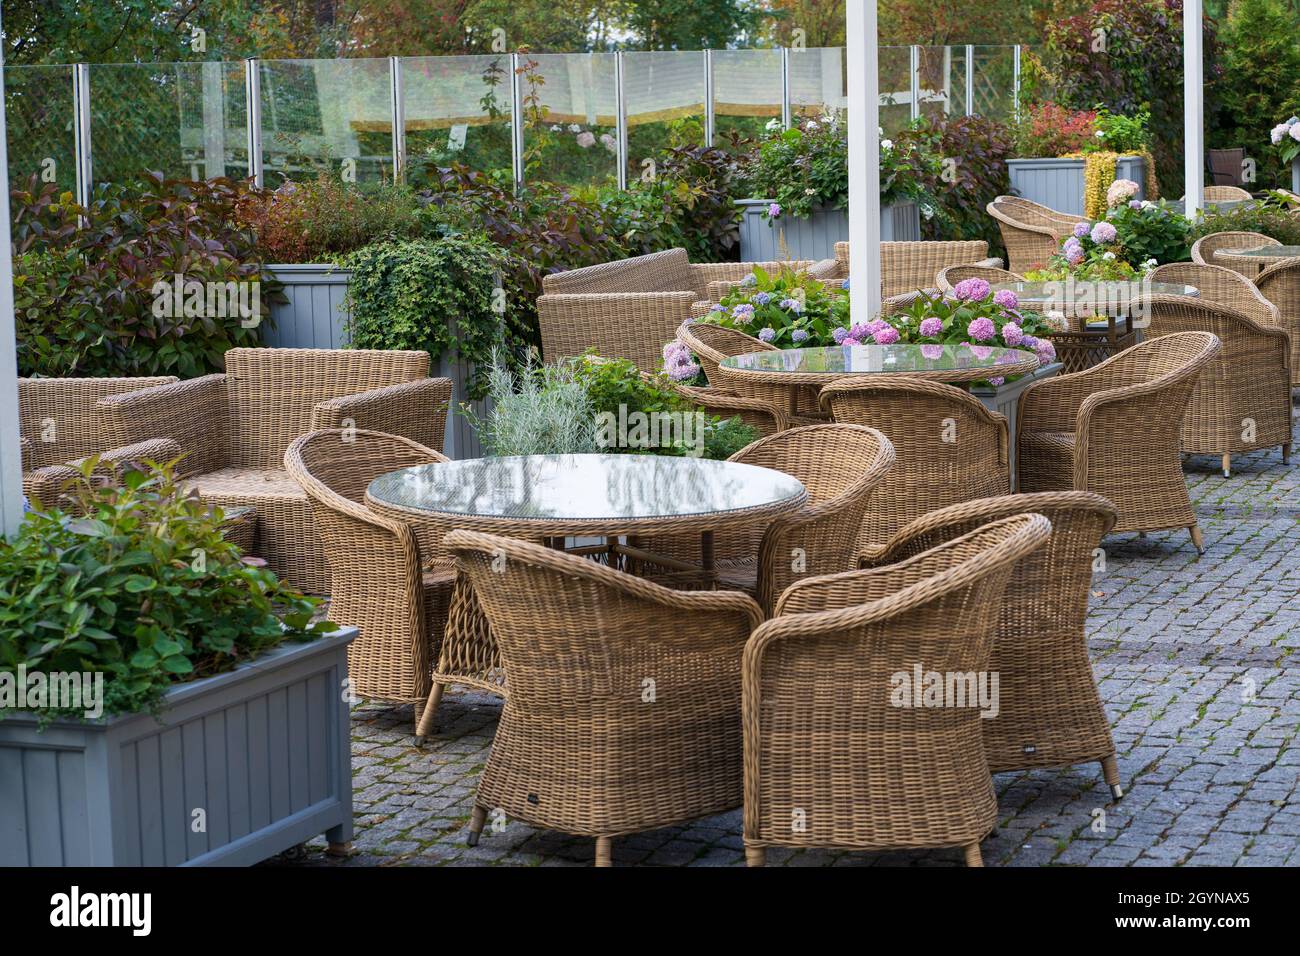 Empty outdoor cafe terrace with wicker furniture and growing flowers in pot for summer entertainment Stock Photo